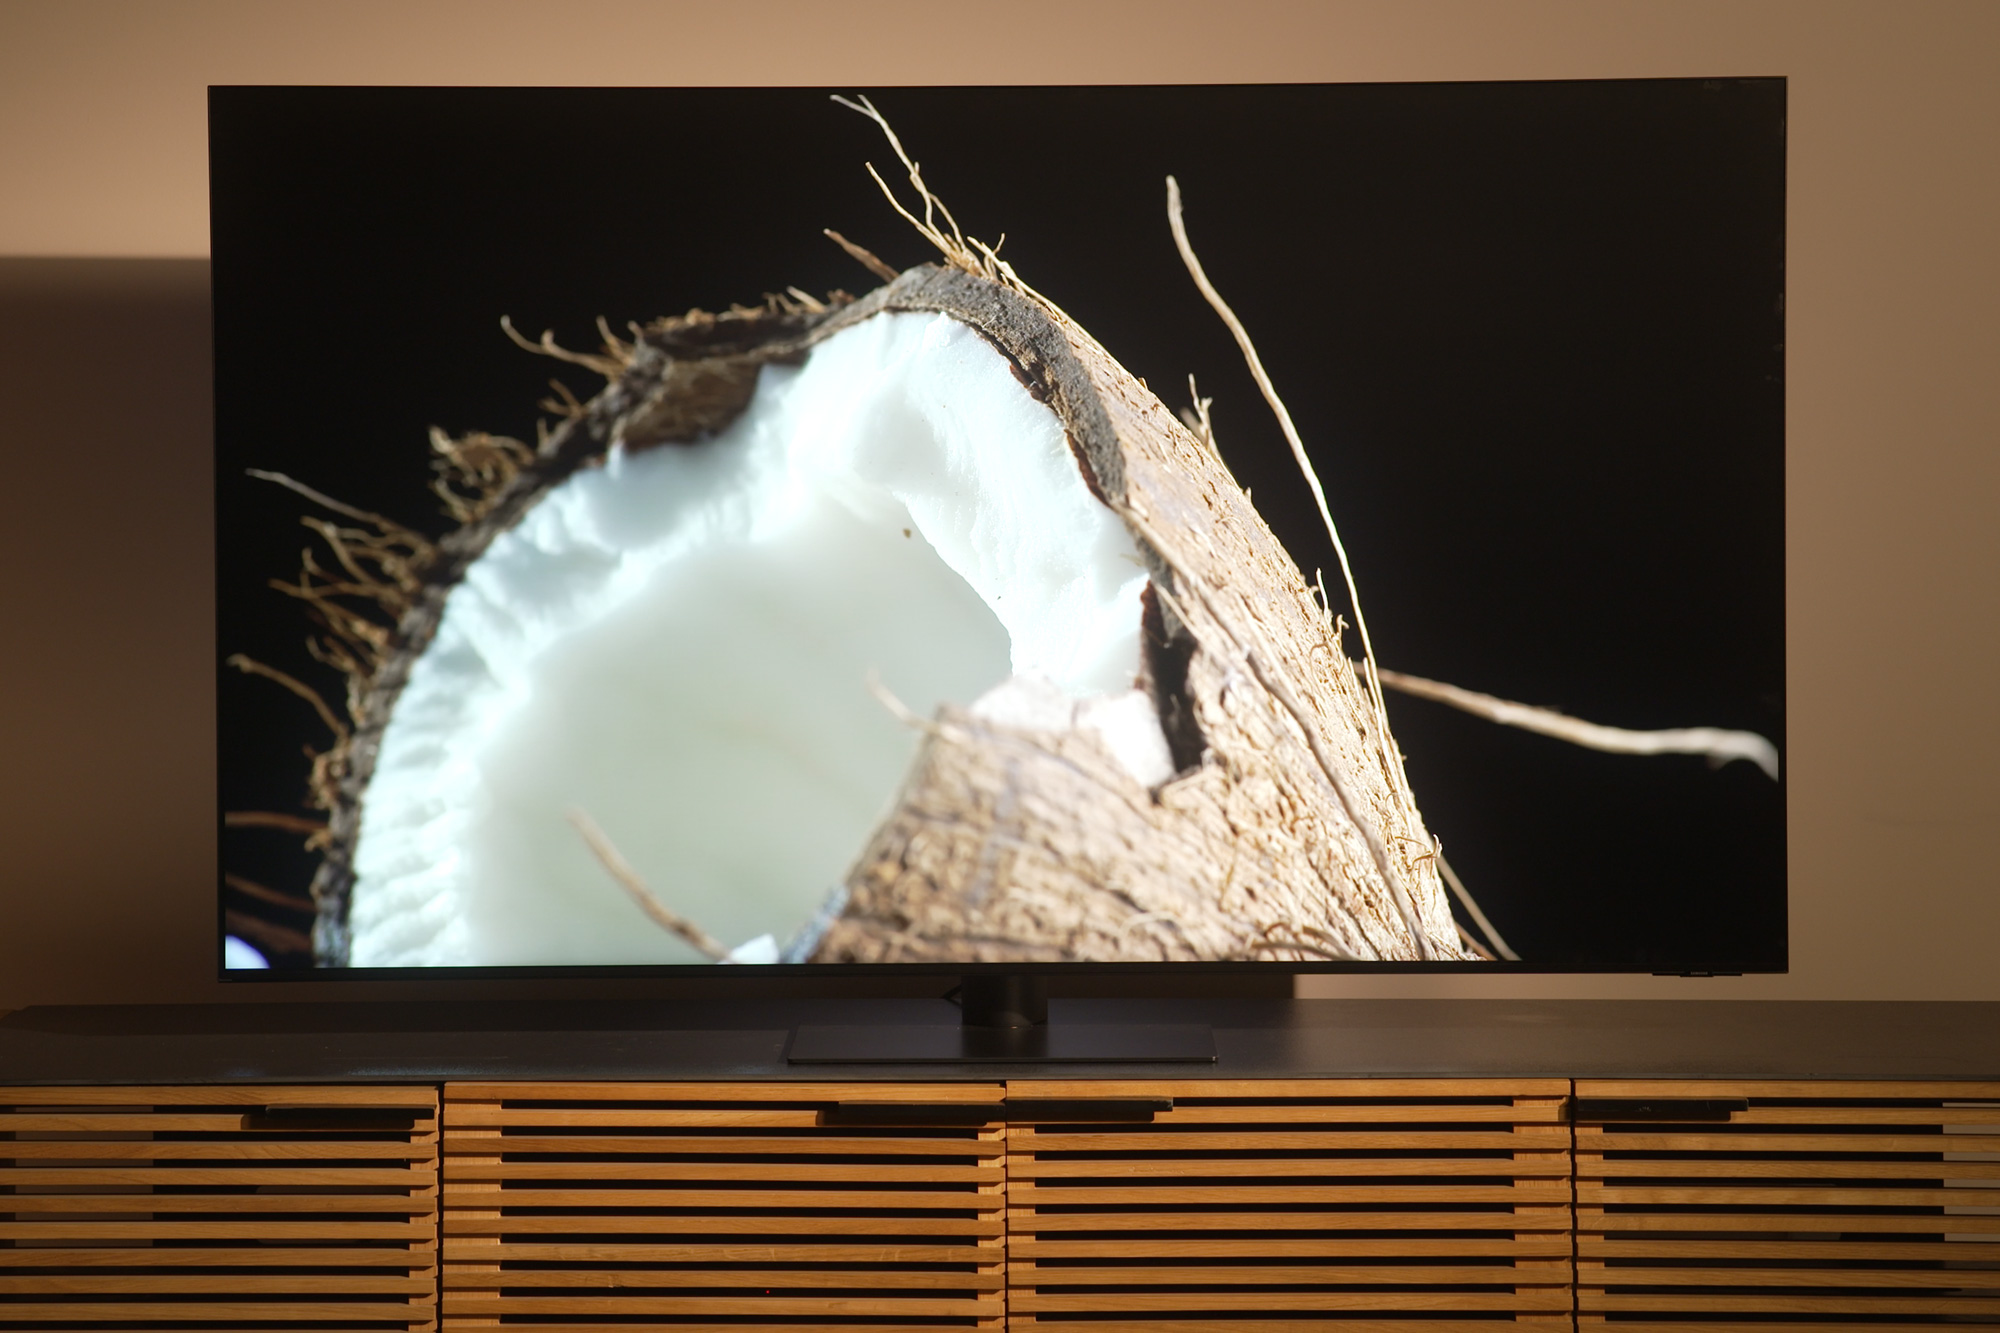 QLED vs. OLED TVs: which is better and what's the difference?